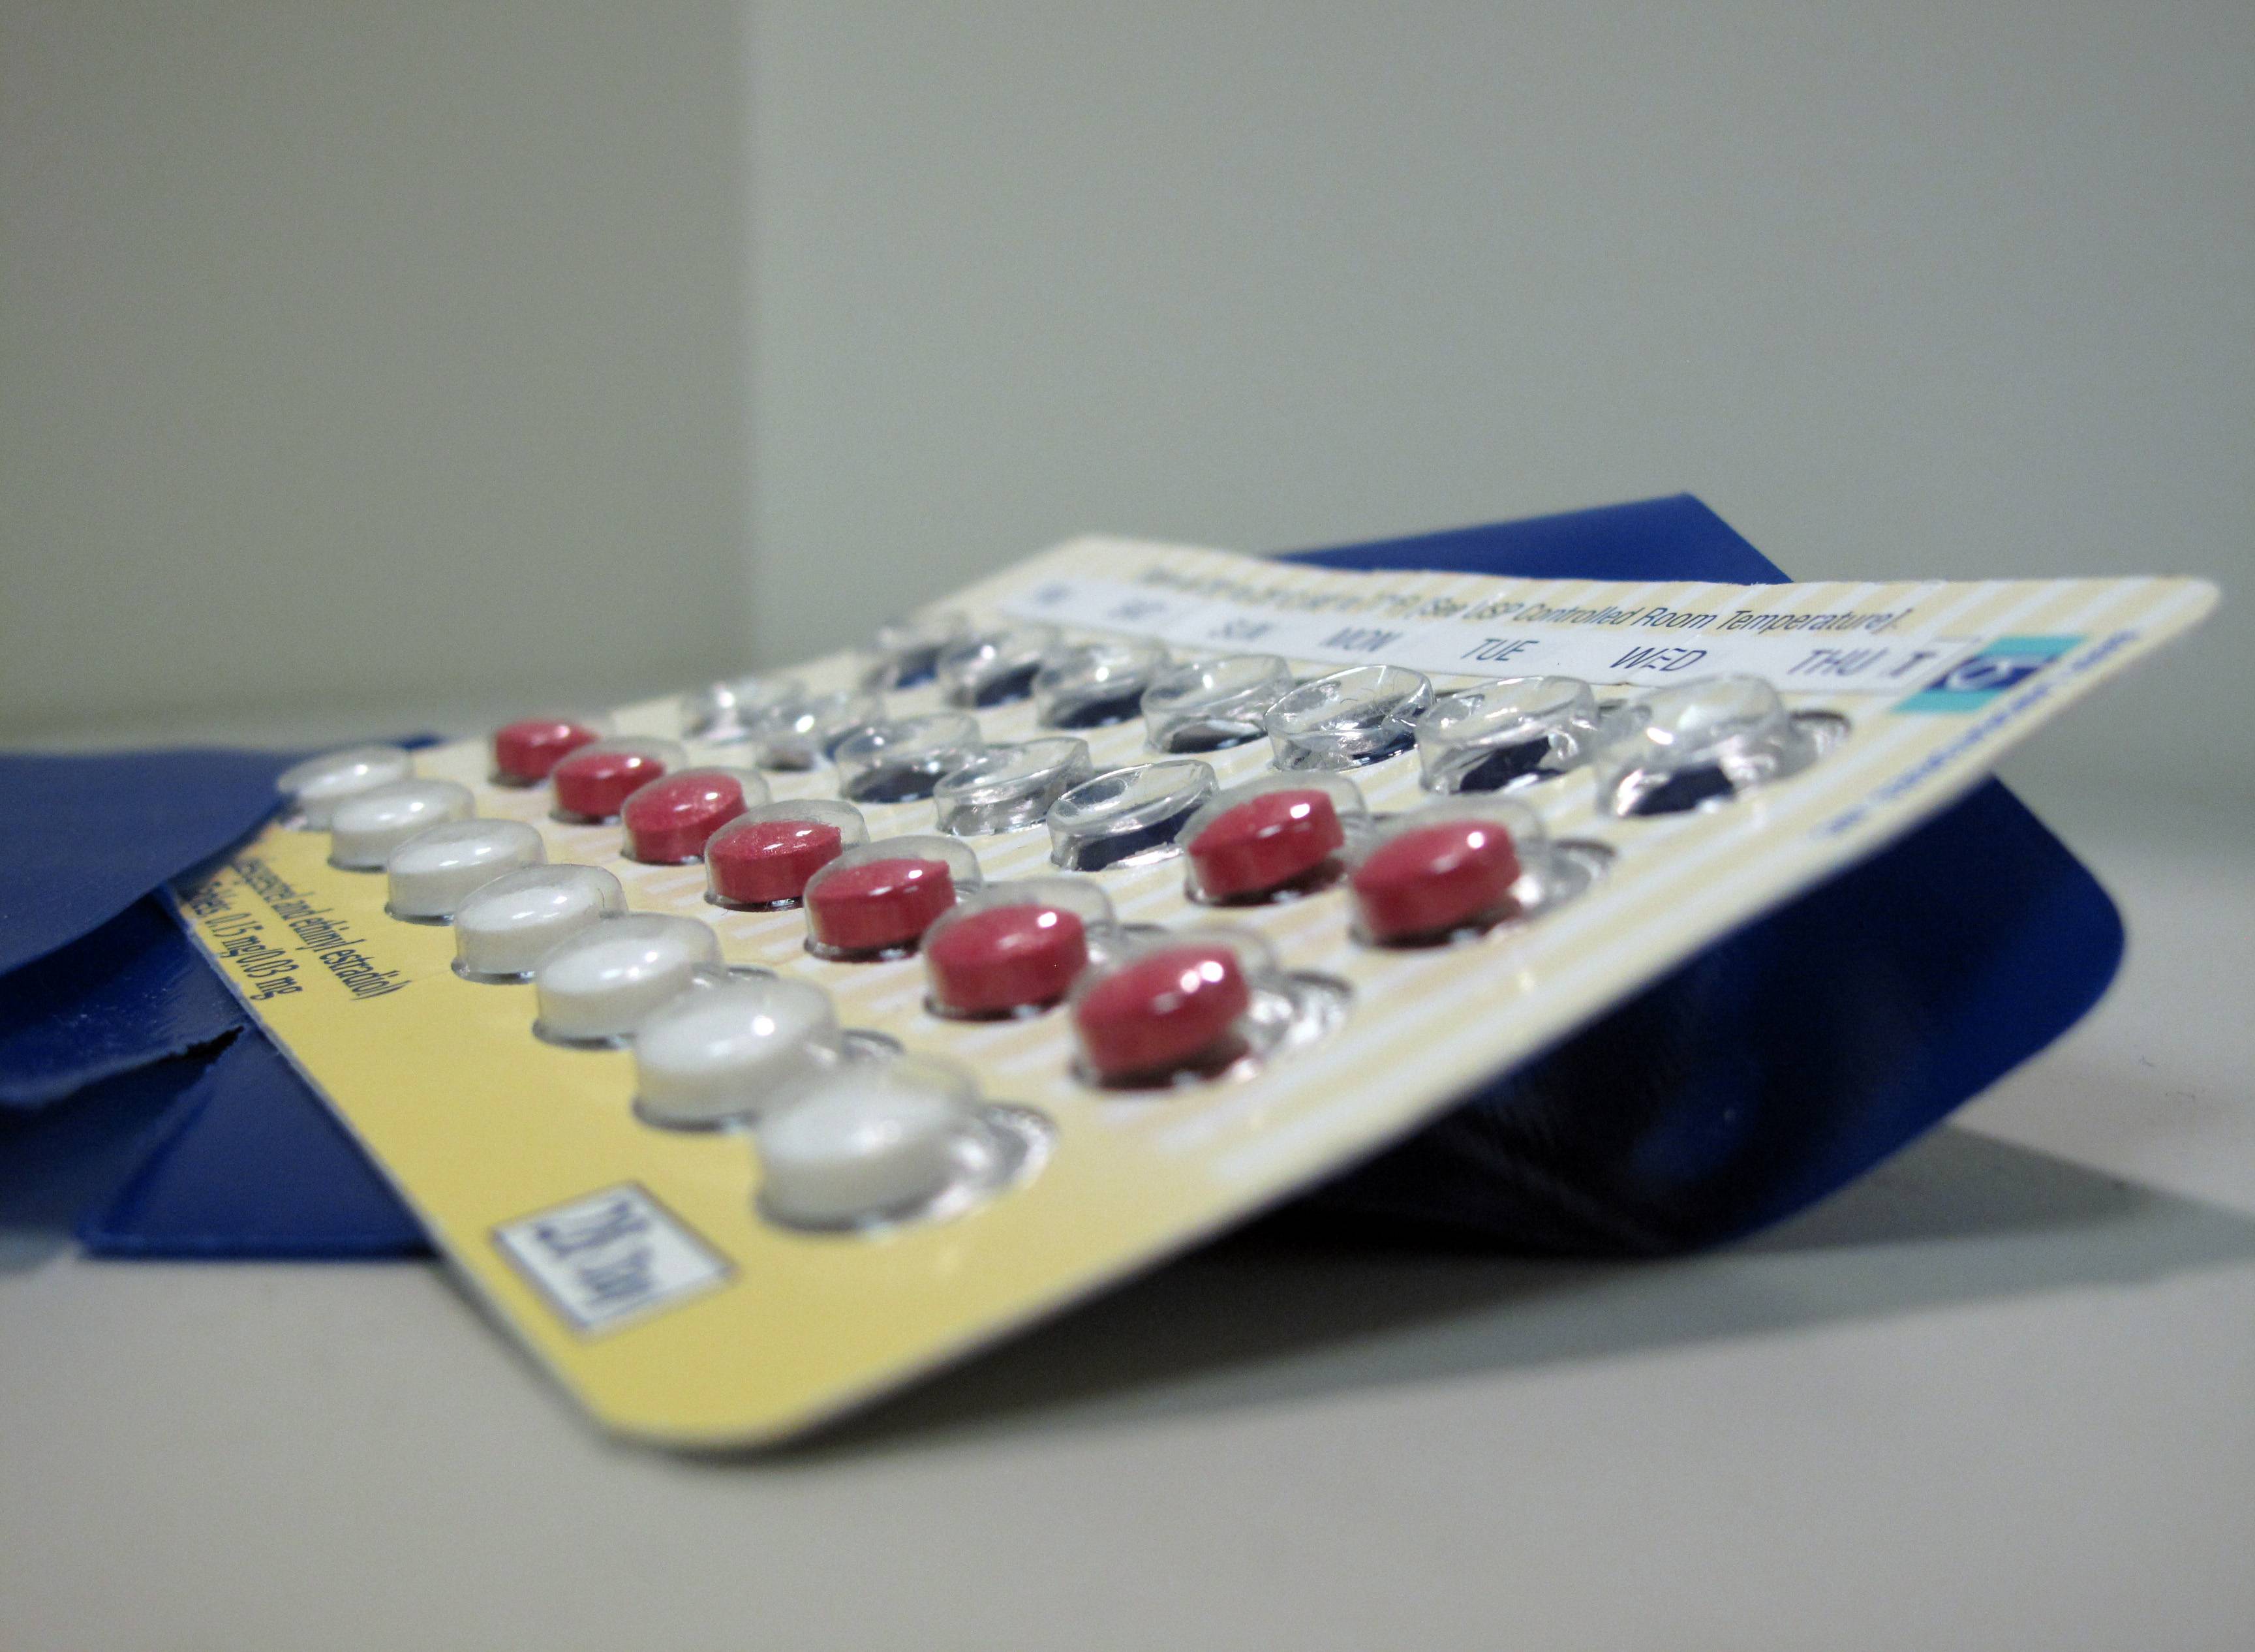 Contraception Coverage by Insurance Companies Now Mandatory - New standards require health insurance companies to cover government-approved contraception for women.(Photo: Kelsey Snell/MCT)